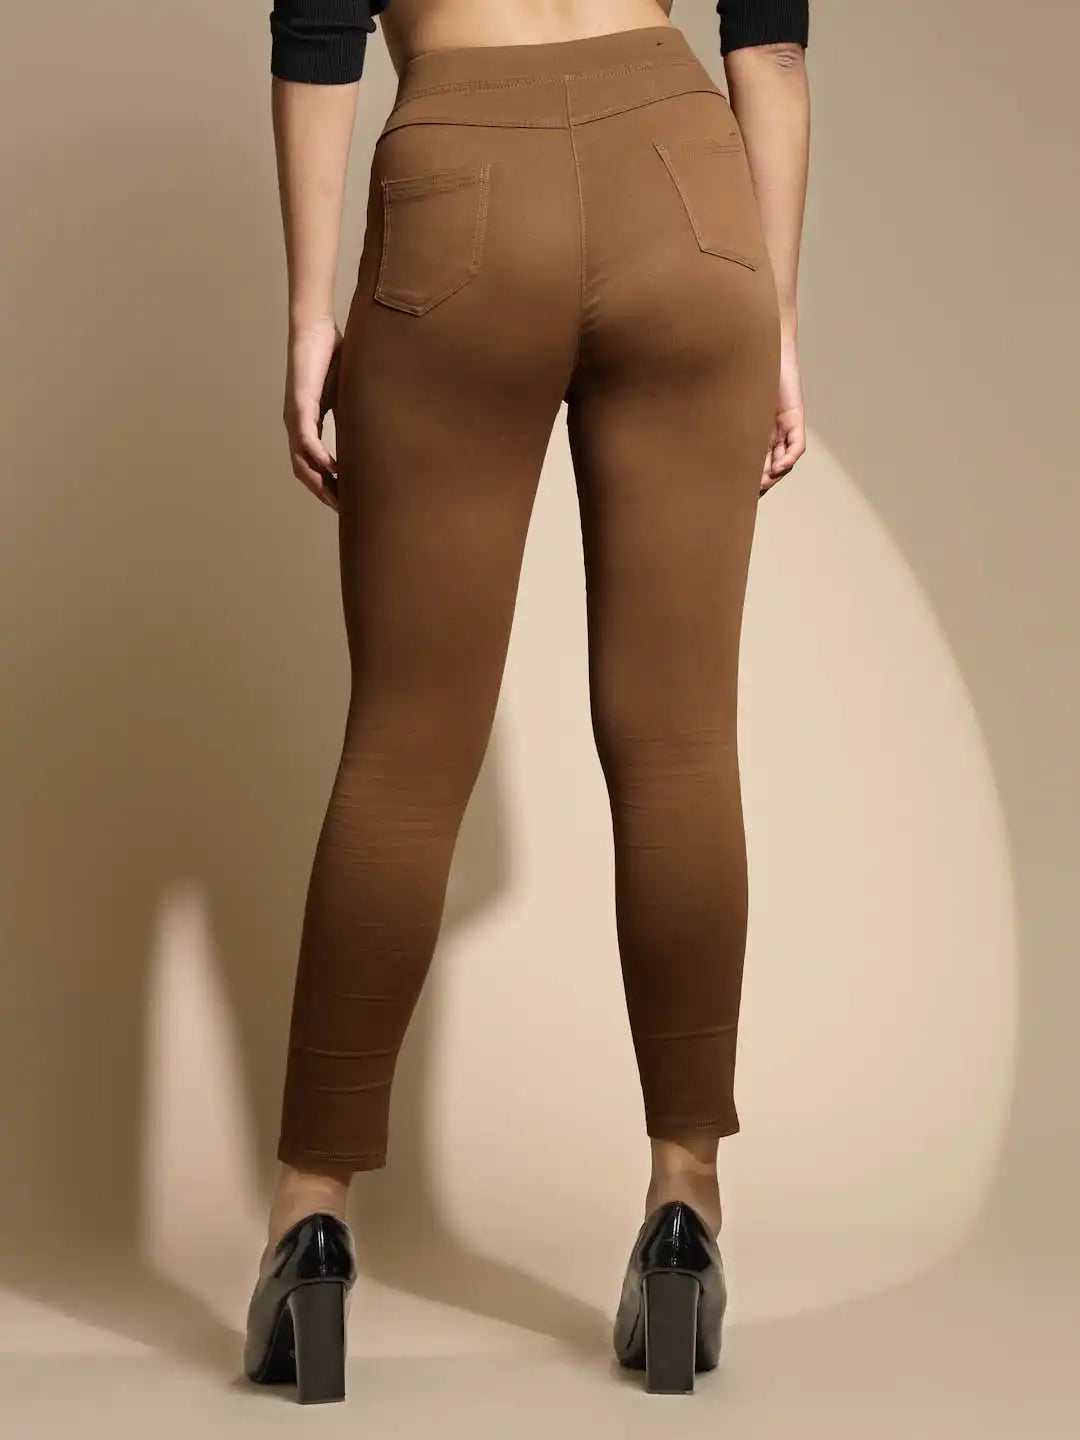 Women Brown Mid-Rise Slim Fit Stretchable Jegging